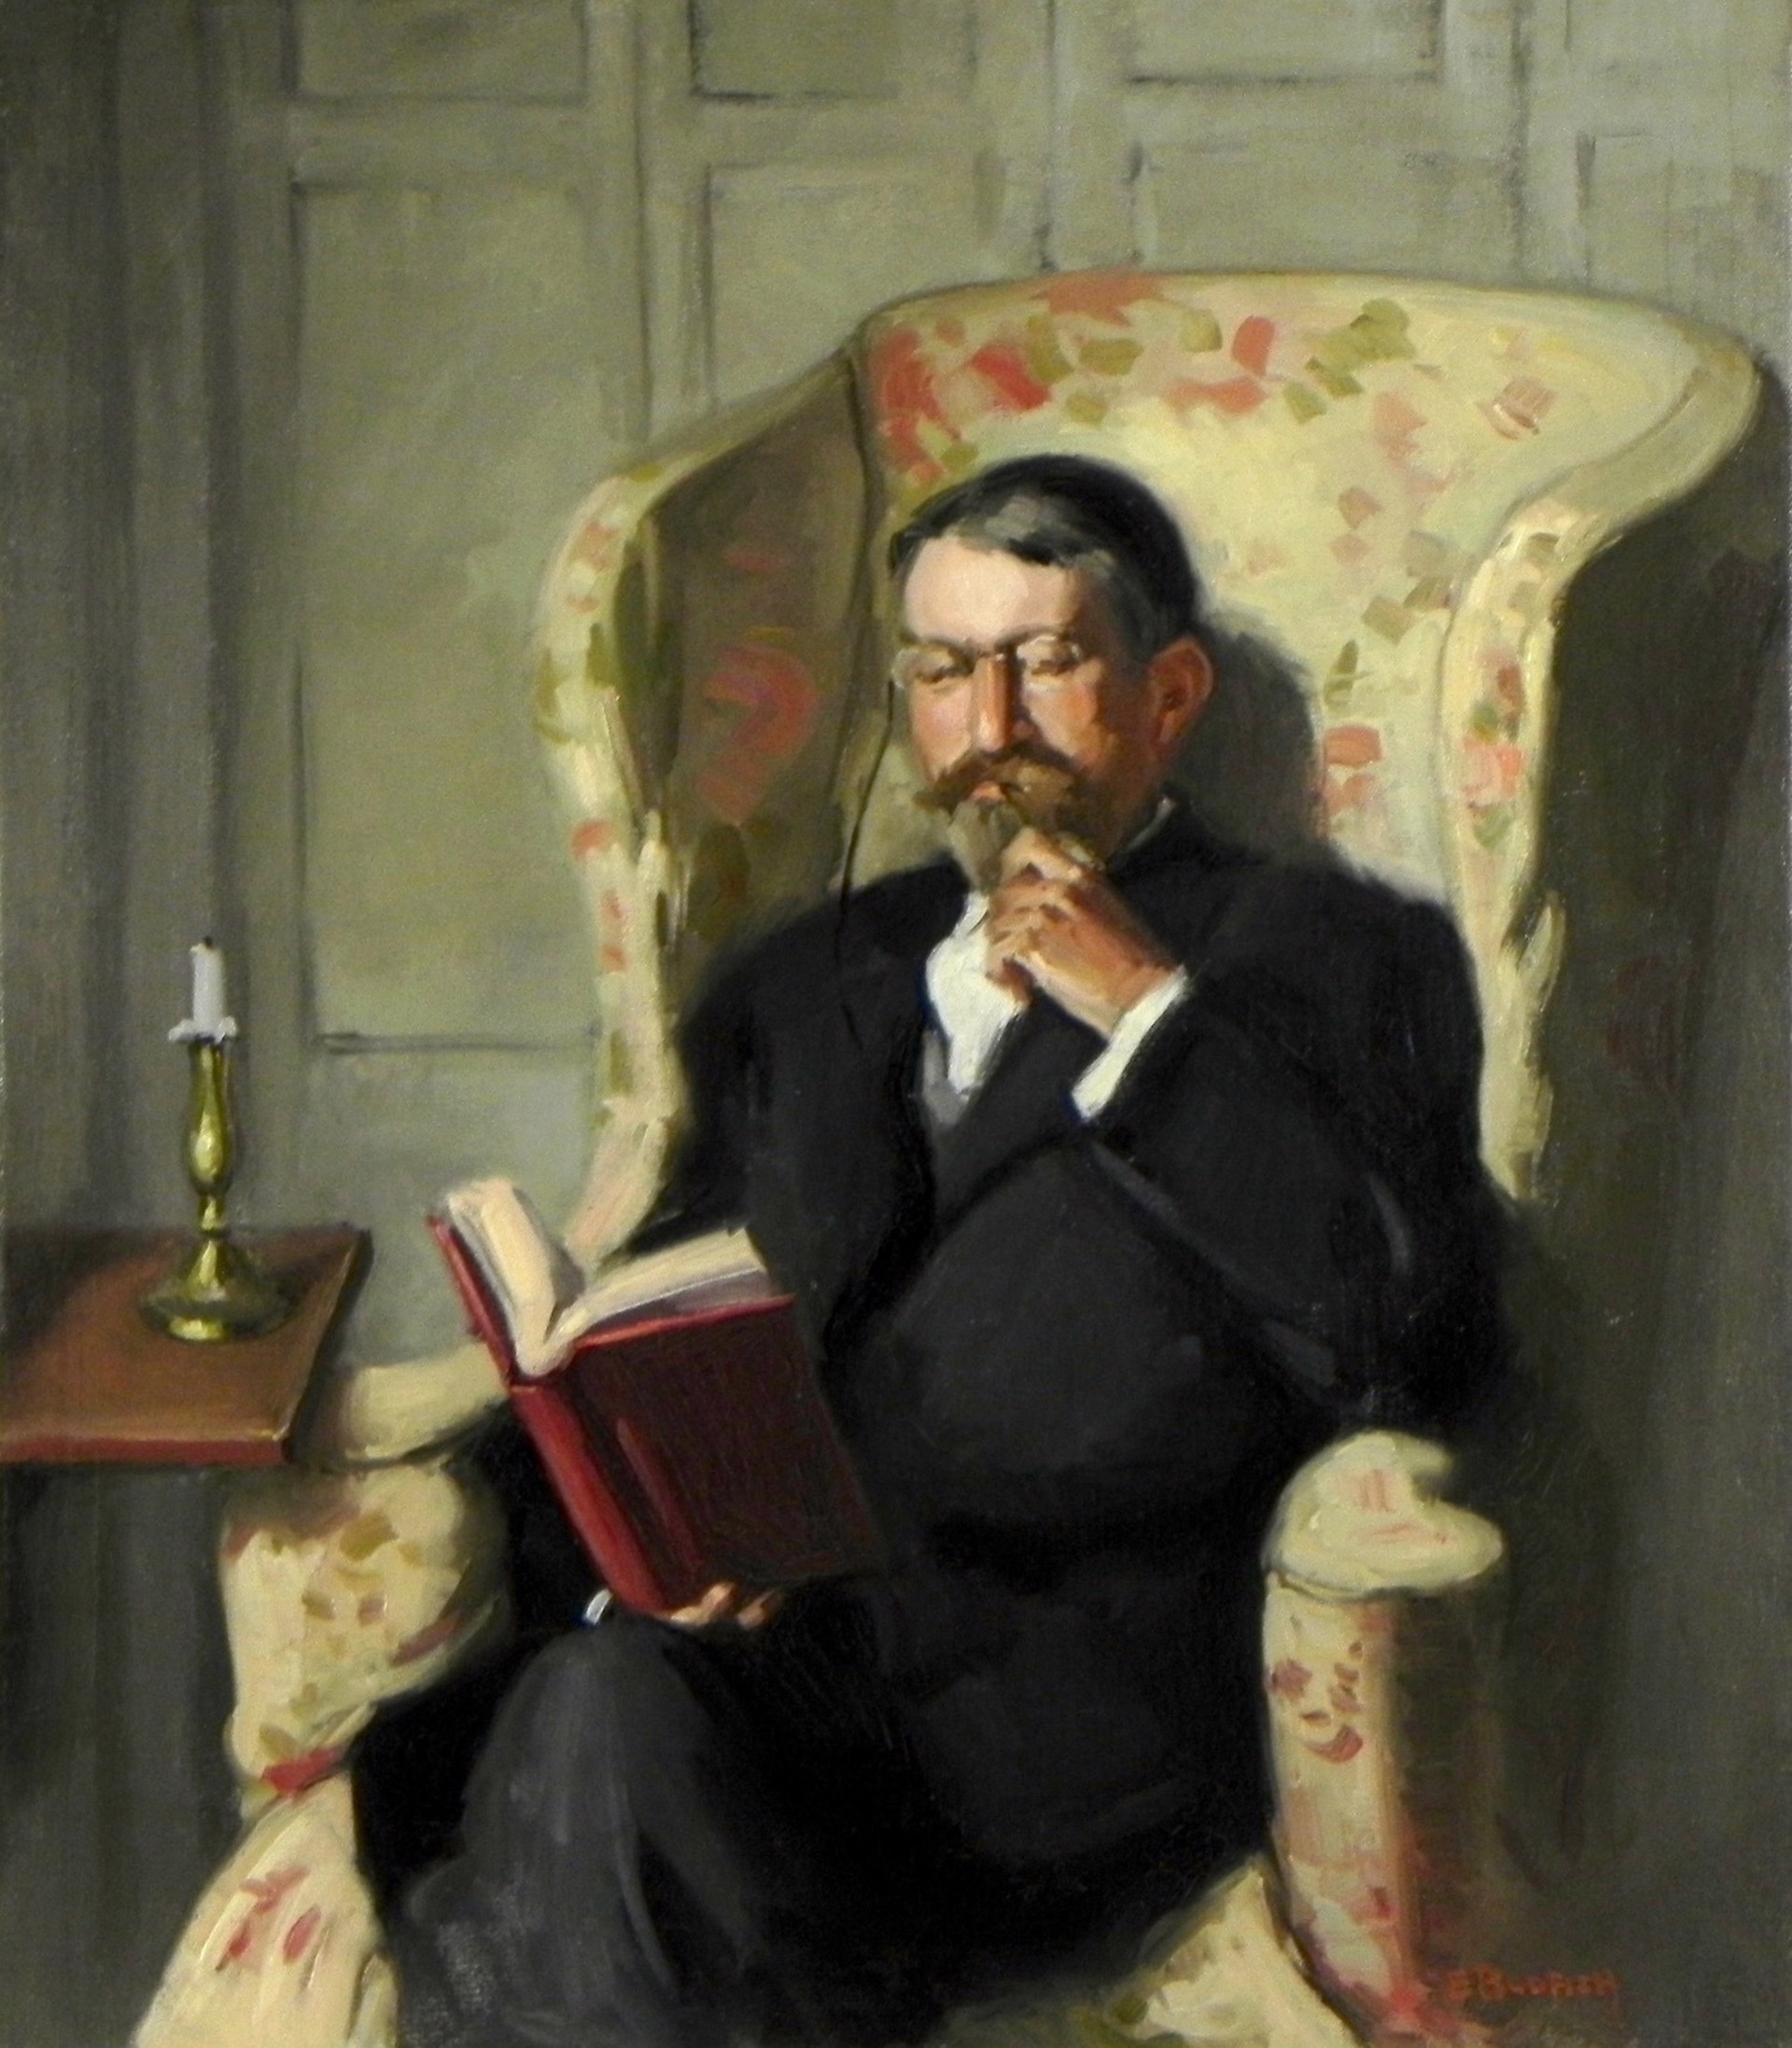 Father in Wingchair by Evelin Bodfish Bourne